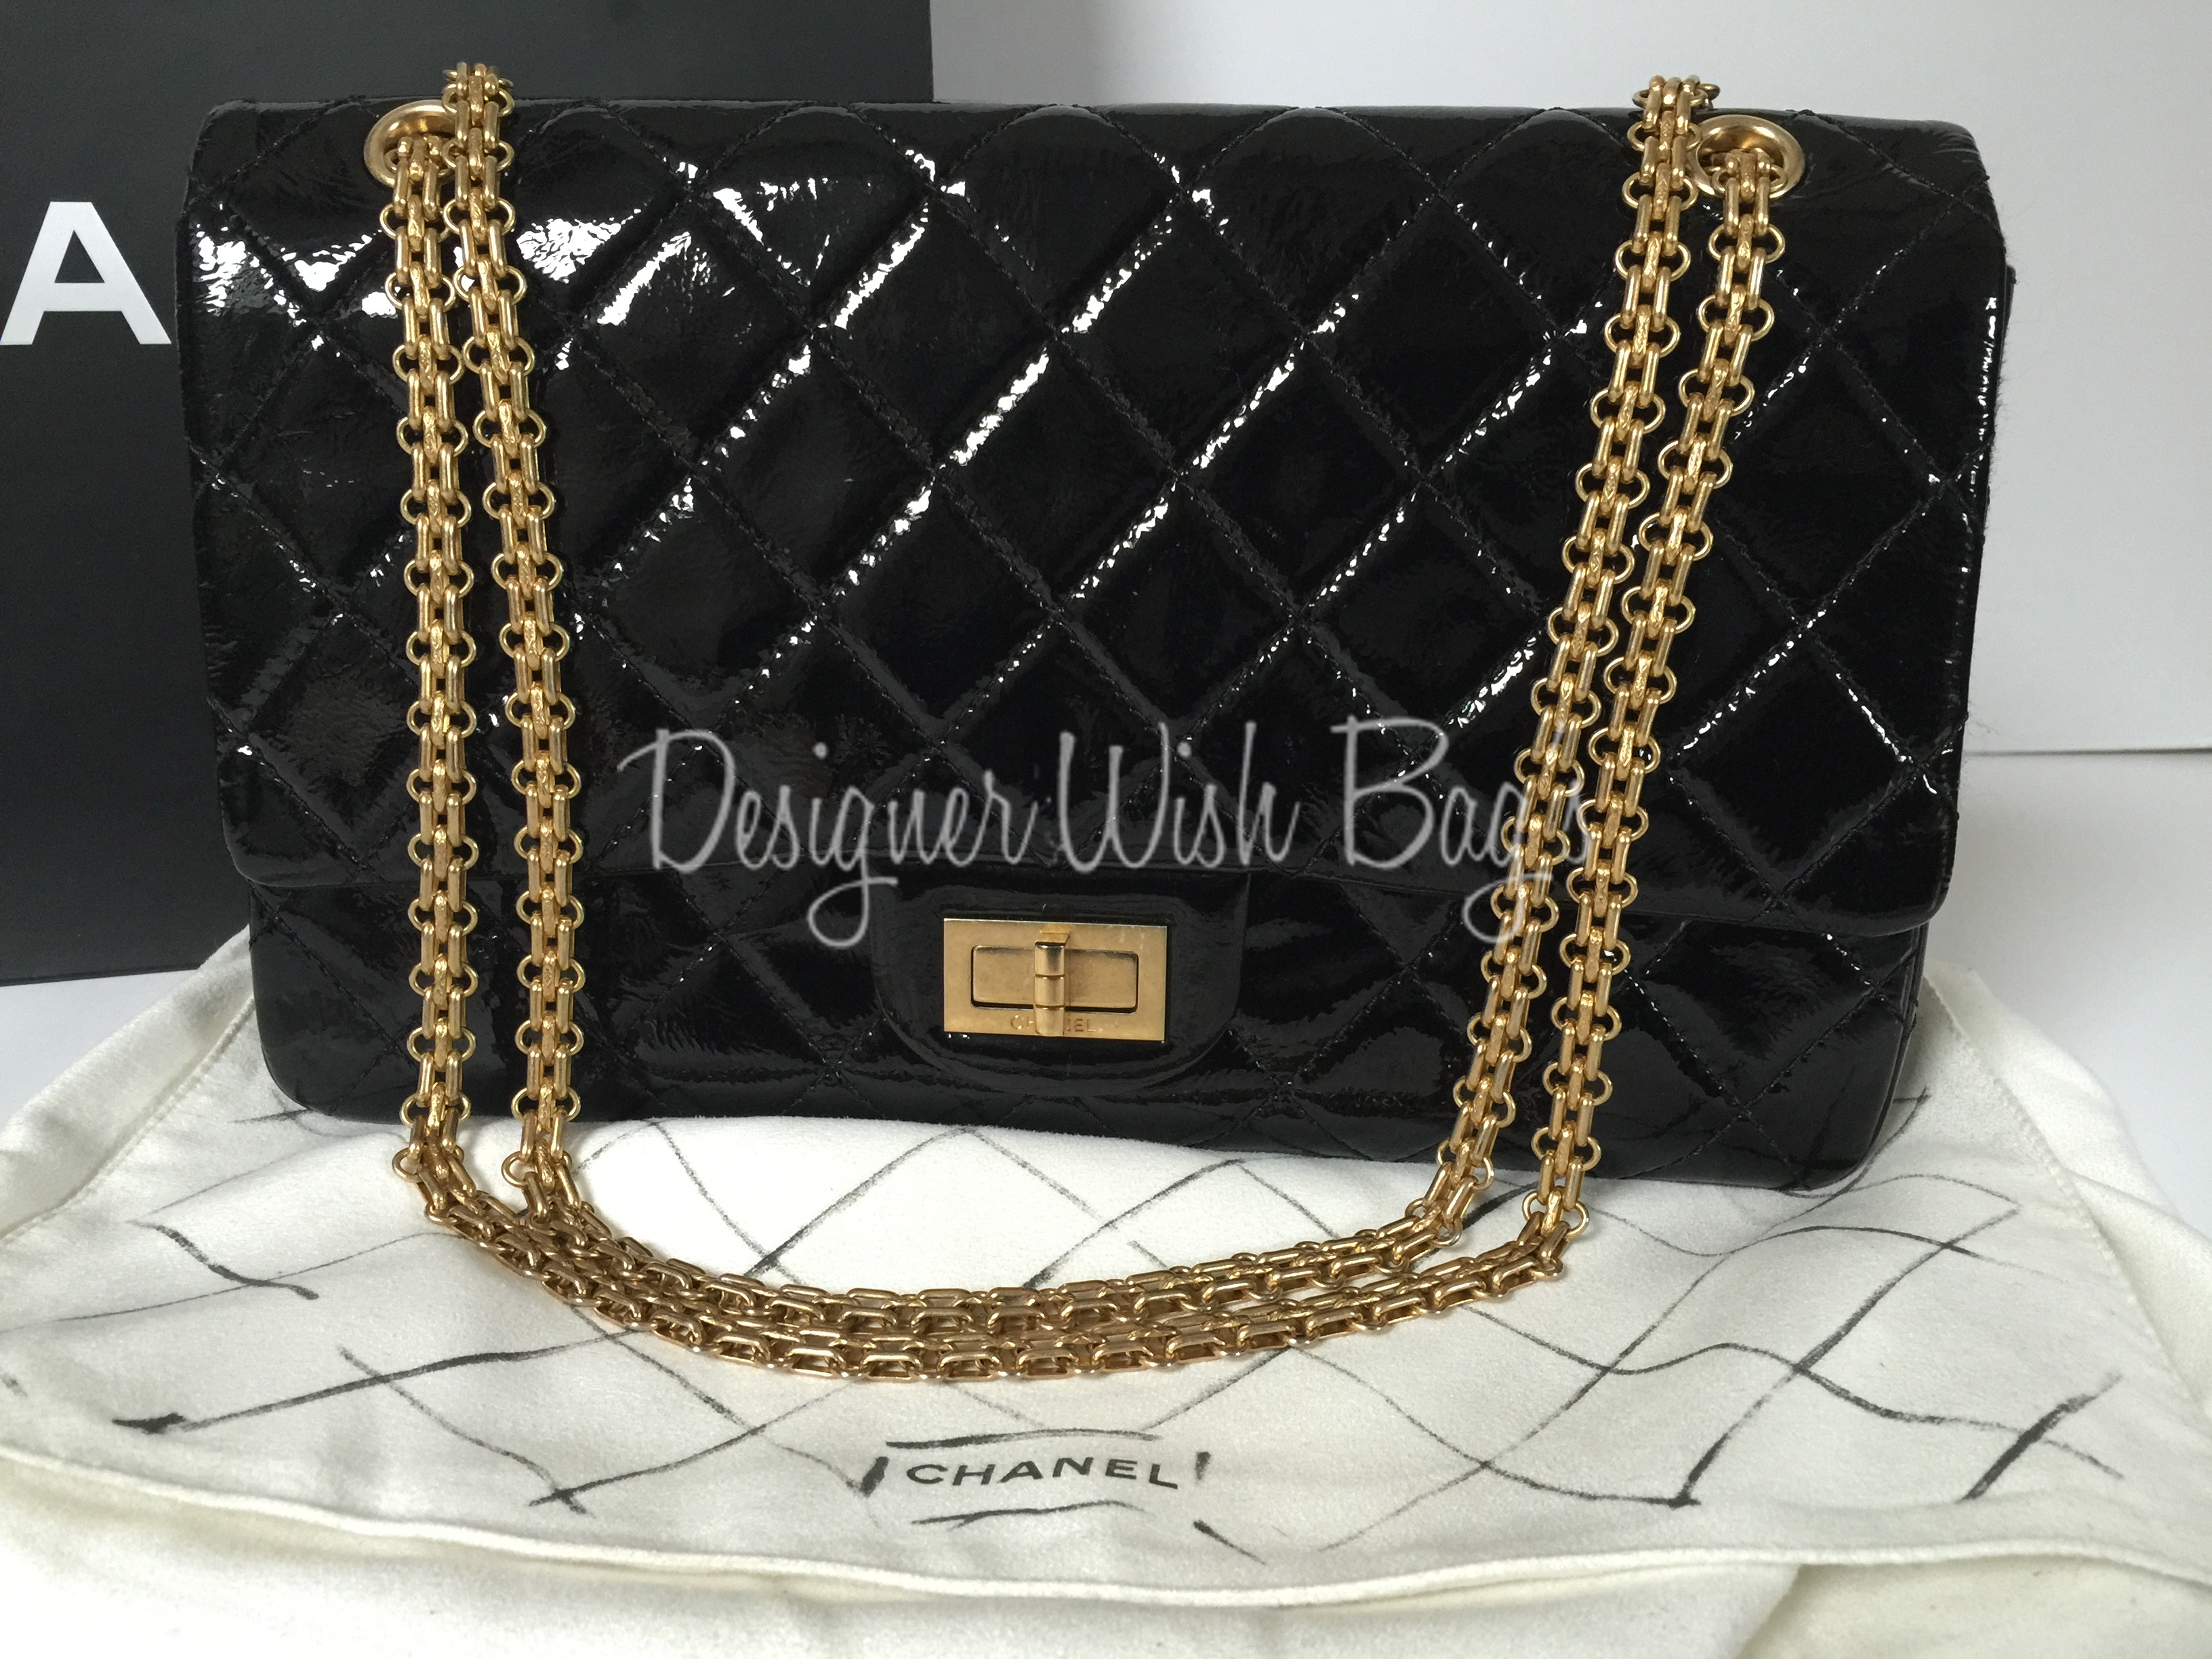 Chanel 2.55 Reissue Black Patent Leather